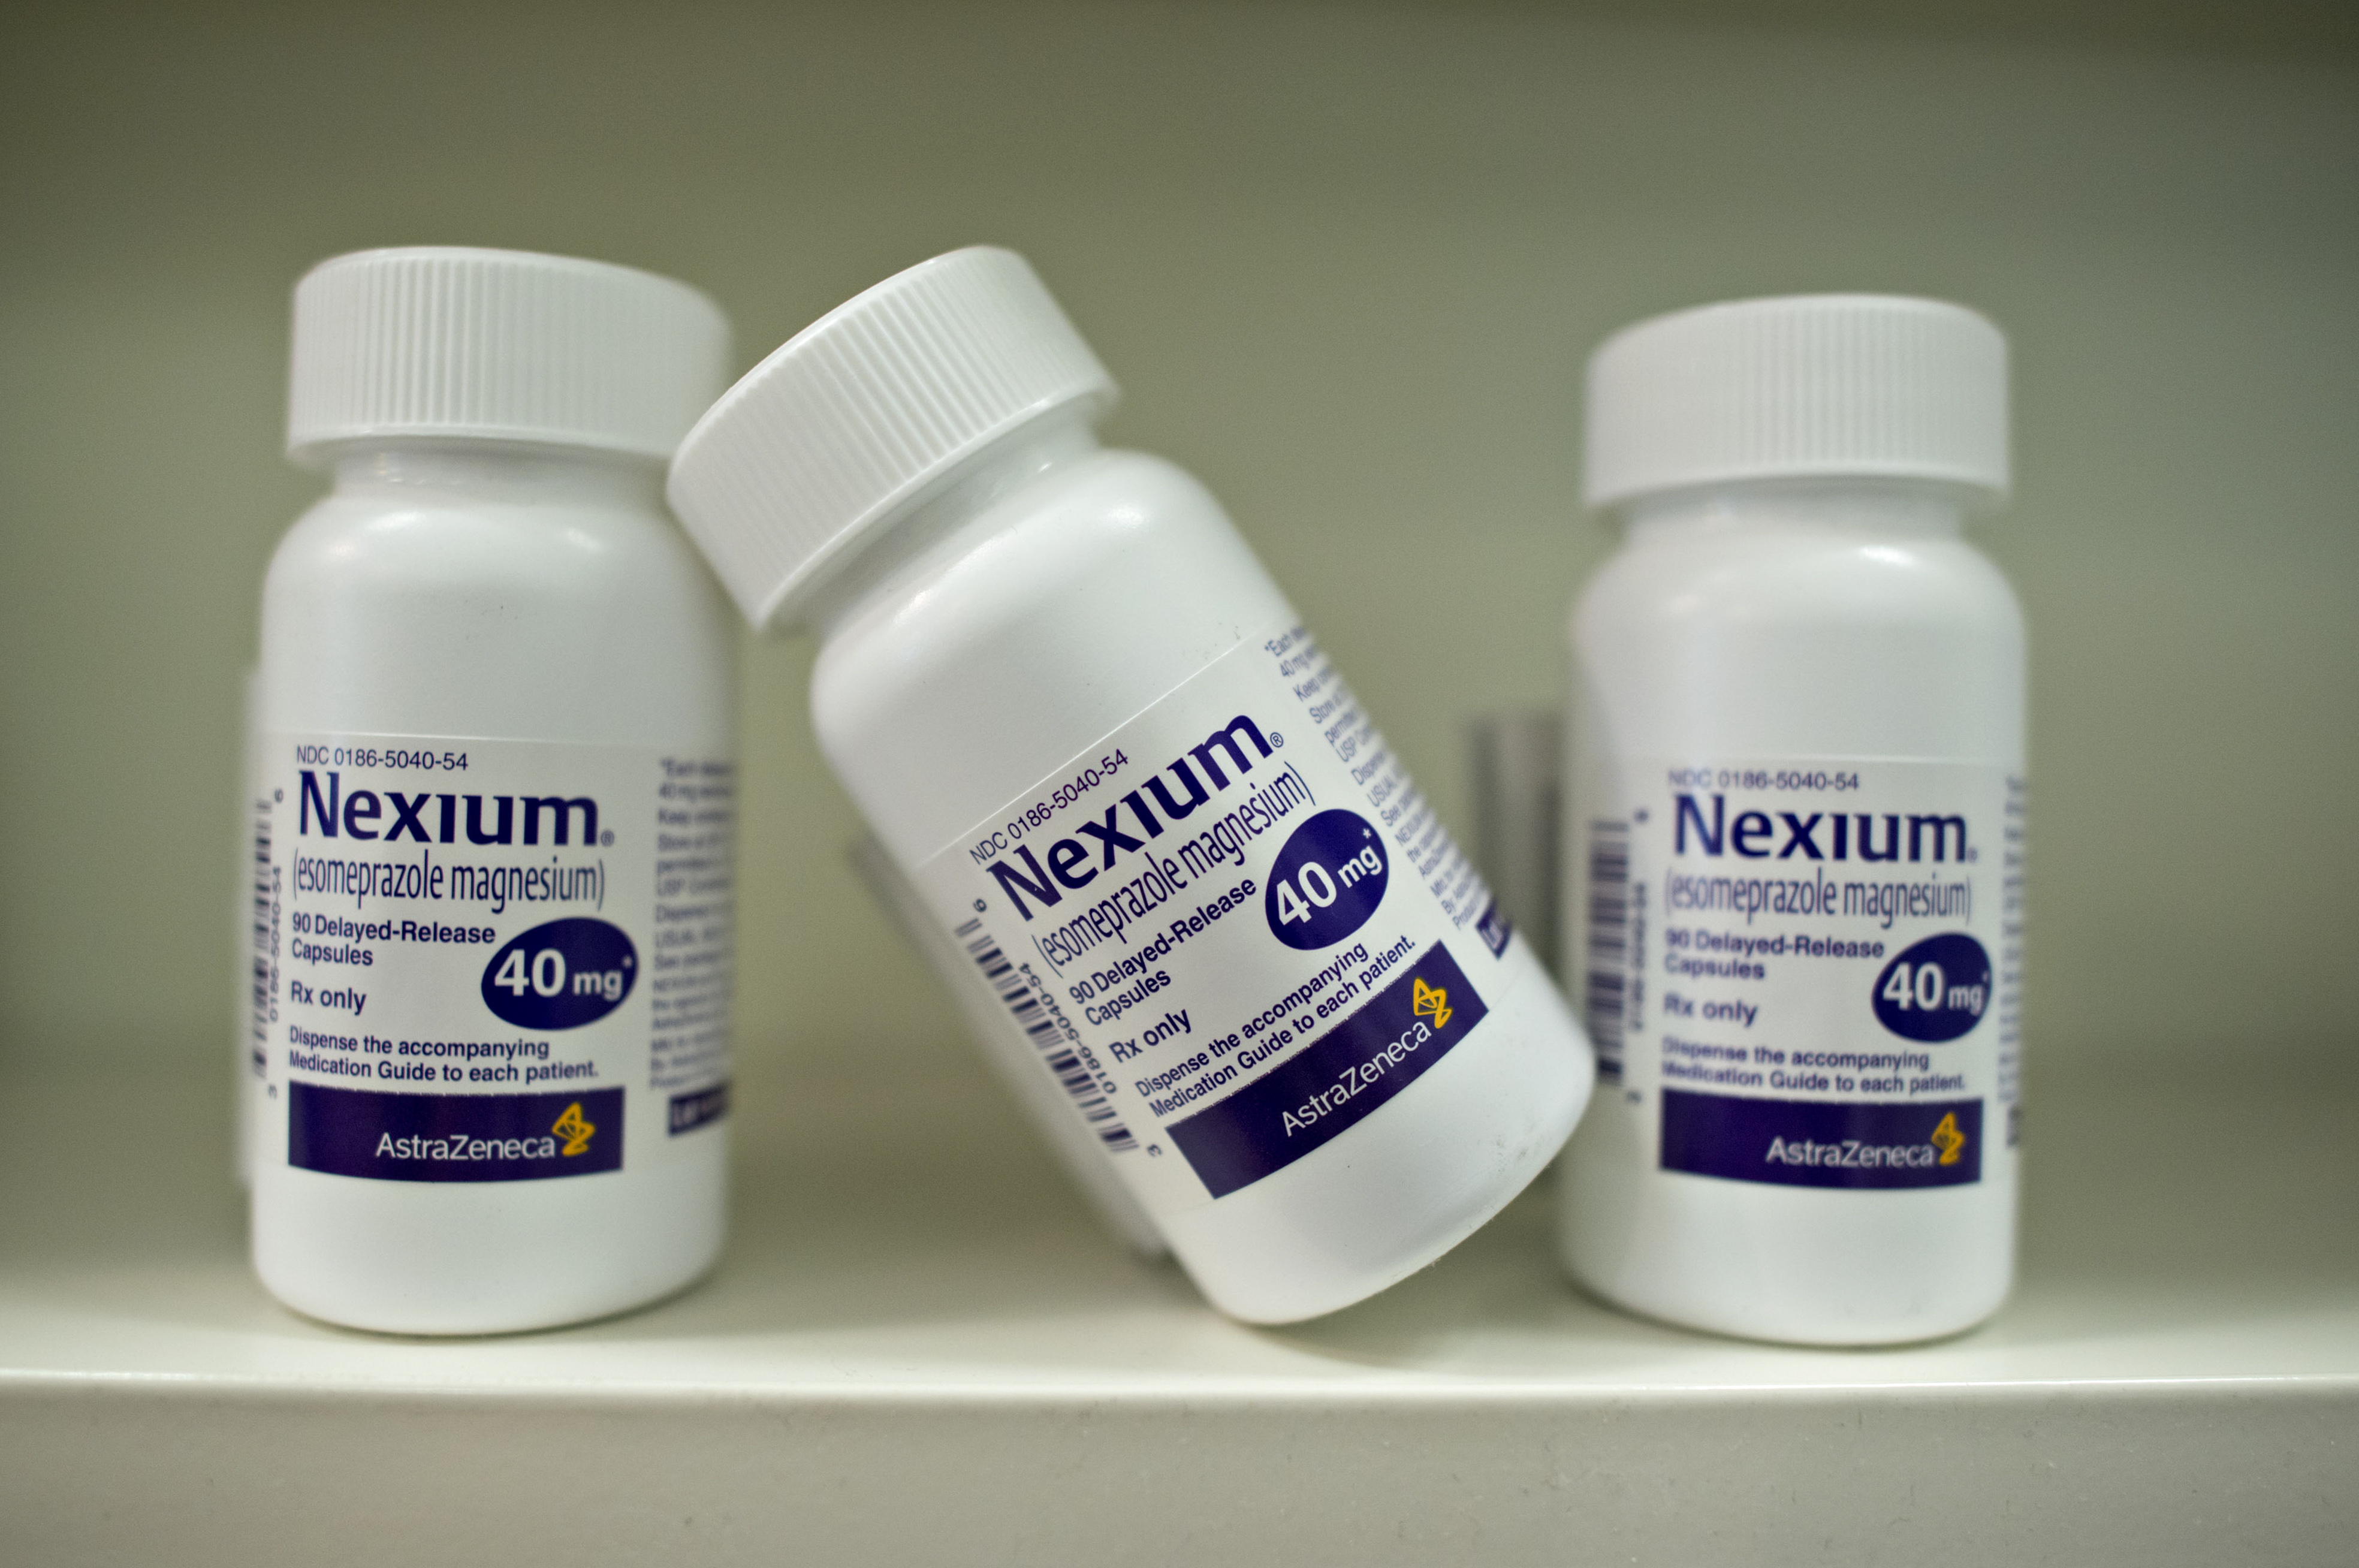 Bottles of AstraZeneca Plc's Nexium heartburn medication are arranged for a photograph at a pharmacy in Princeton, Illinois, U.S., on Wednesday, Aug. 20, 2014. (Daniel Acker—Bloomberg/Getty Images)